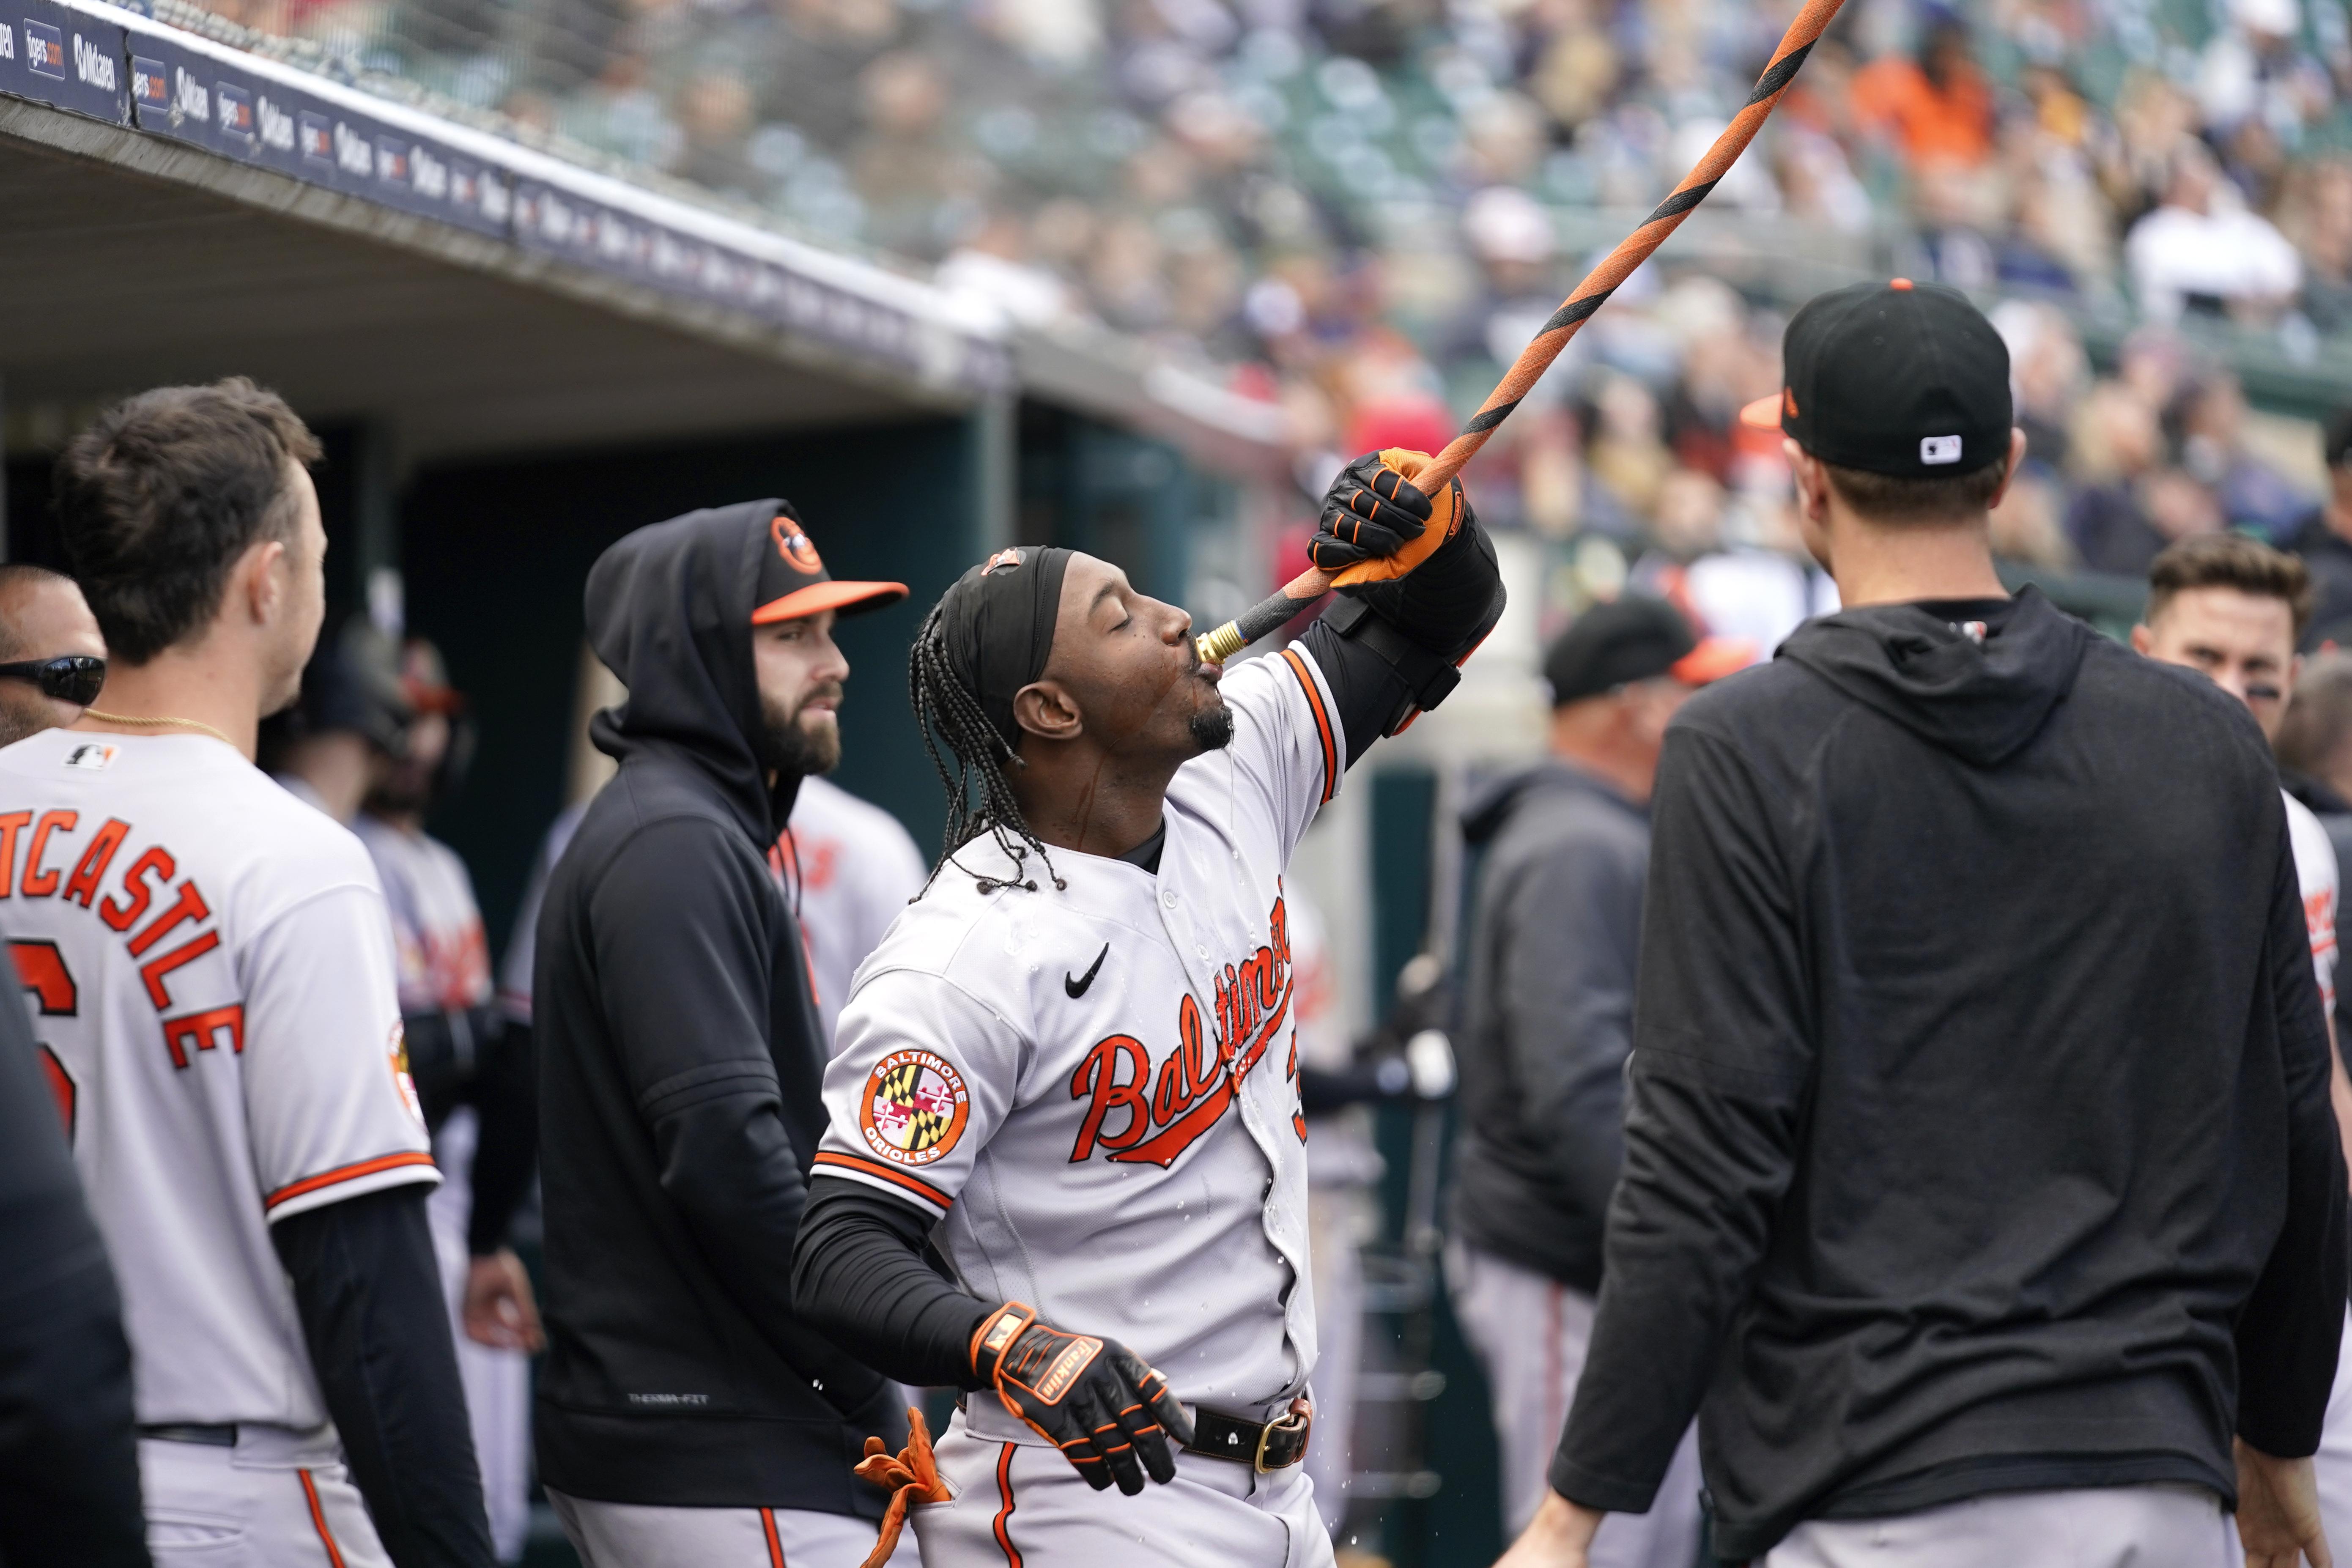 Orioles beat Tigers 5-3 to win sixth straight series - Washington Times